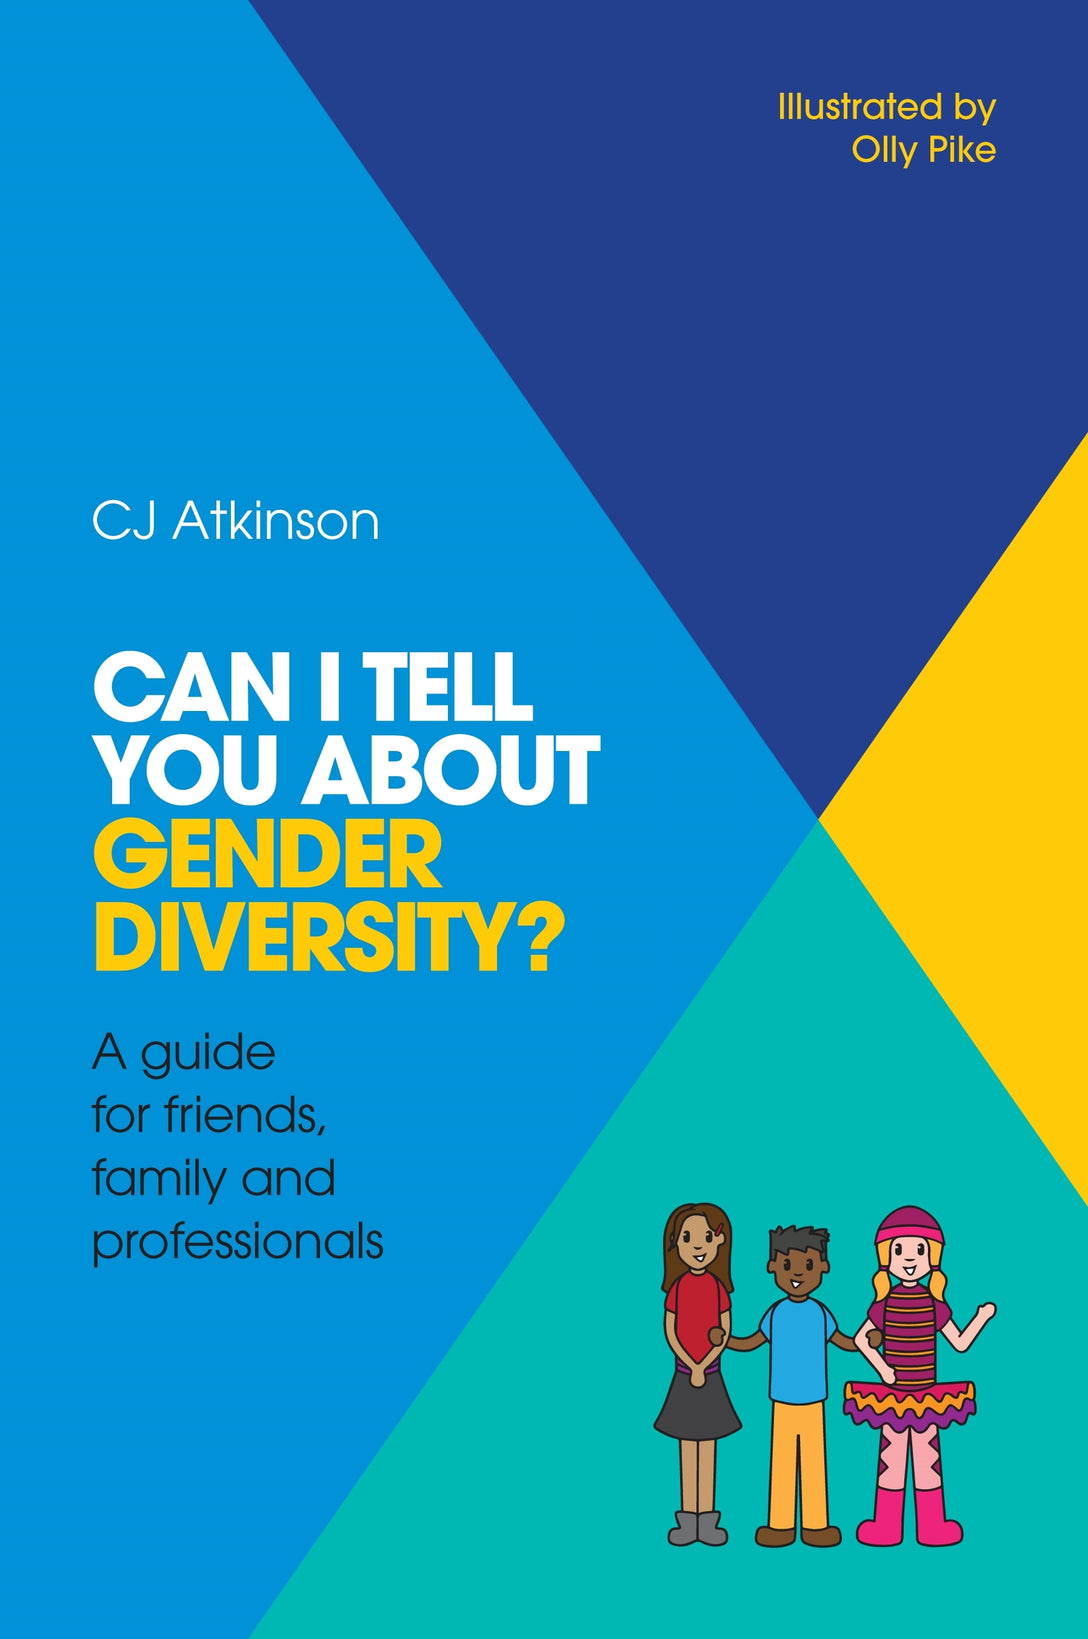 Can I tell you about Gender Diversity? by CJ Atkinson, Olly Pike